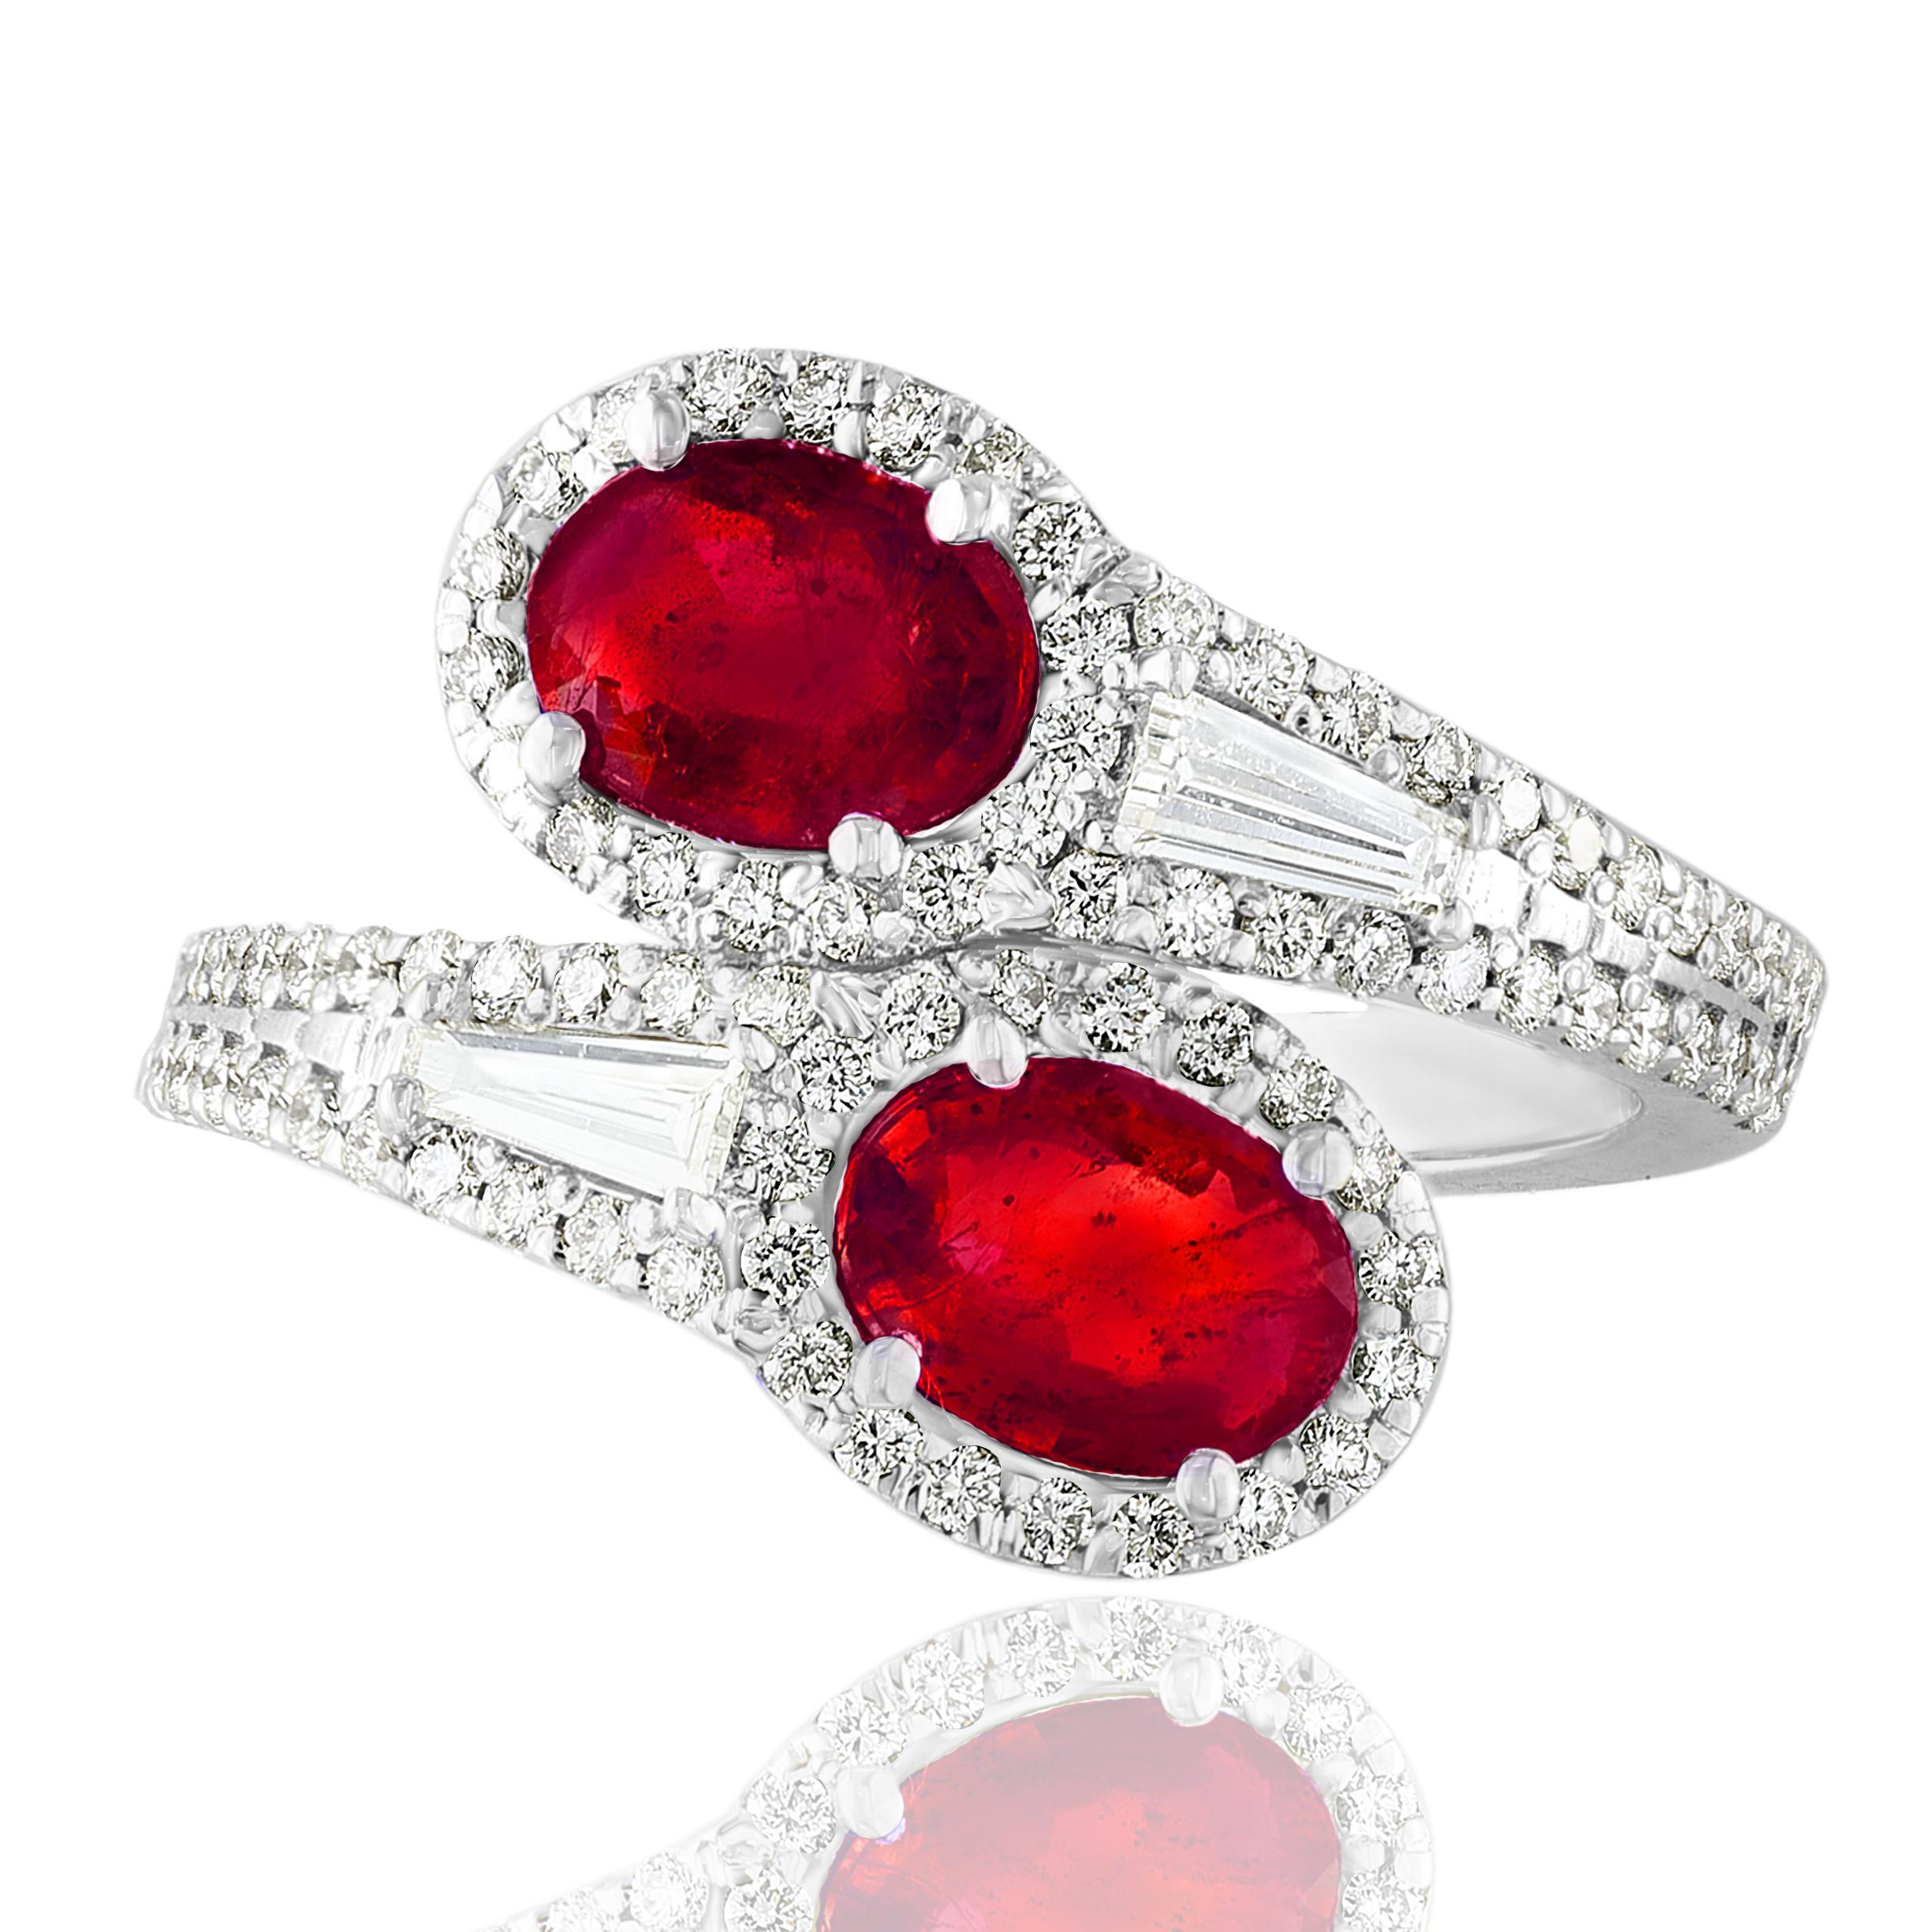 The stunning forever-together Toi et Moi ring features 2 Oval cut Rubies embraced by east to west 2 baguette diamonds weigh and 84 round diamonds halfway to the shank. Handcrafted in 14k White Gold.
2 oval Rubies in the center weigh 1.67 carats and